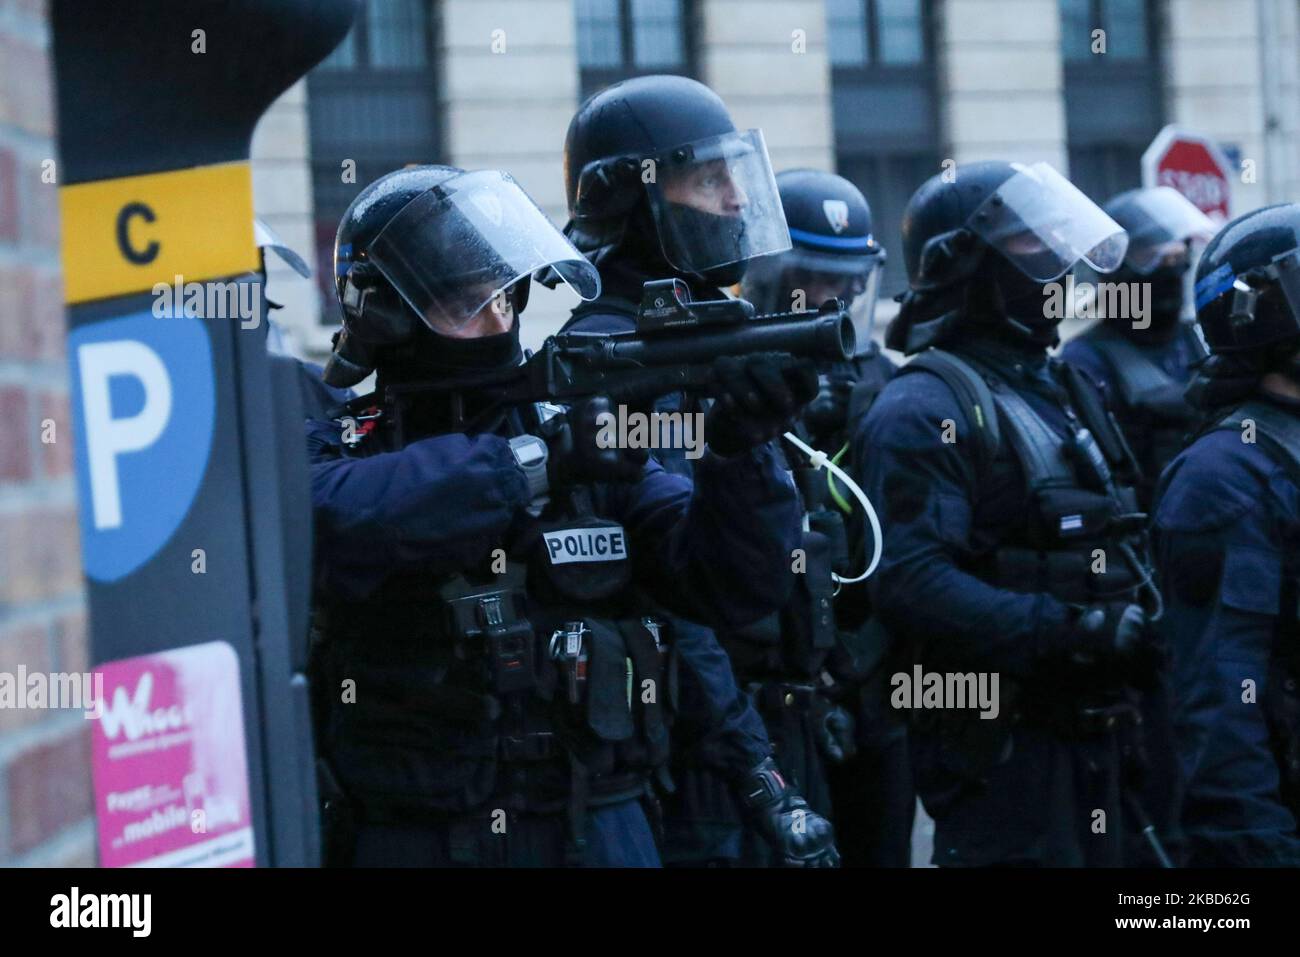 Riot police control during a demonstration on December 17, 2019 in ...